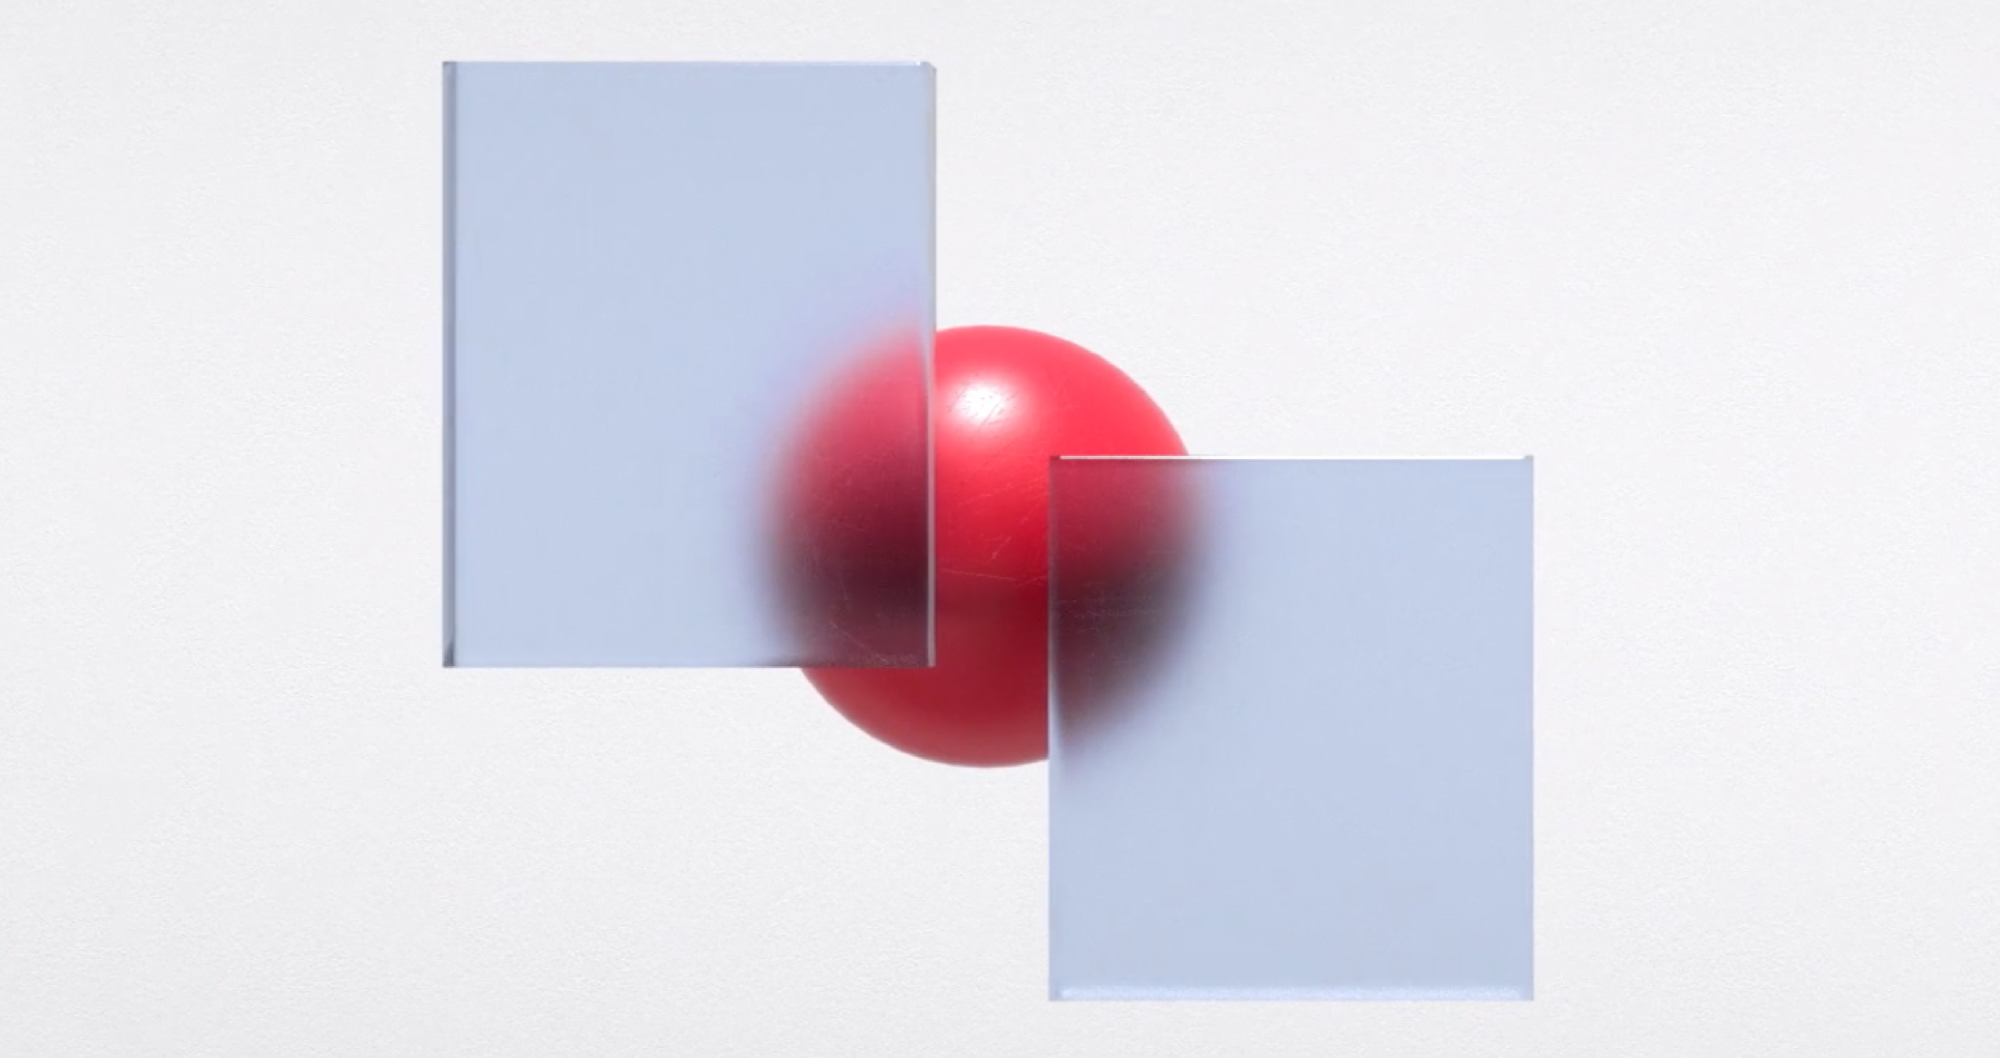 Light Blue boxes, overlaying on a red sphere with a grey background